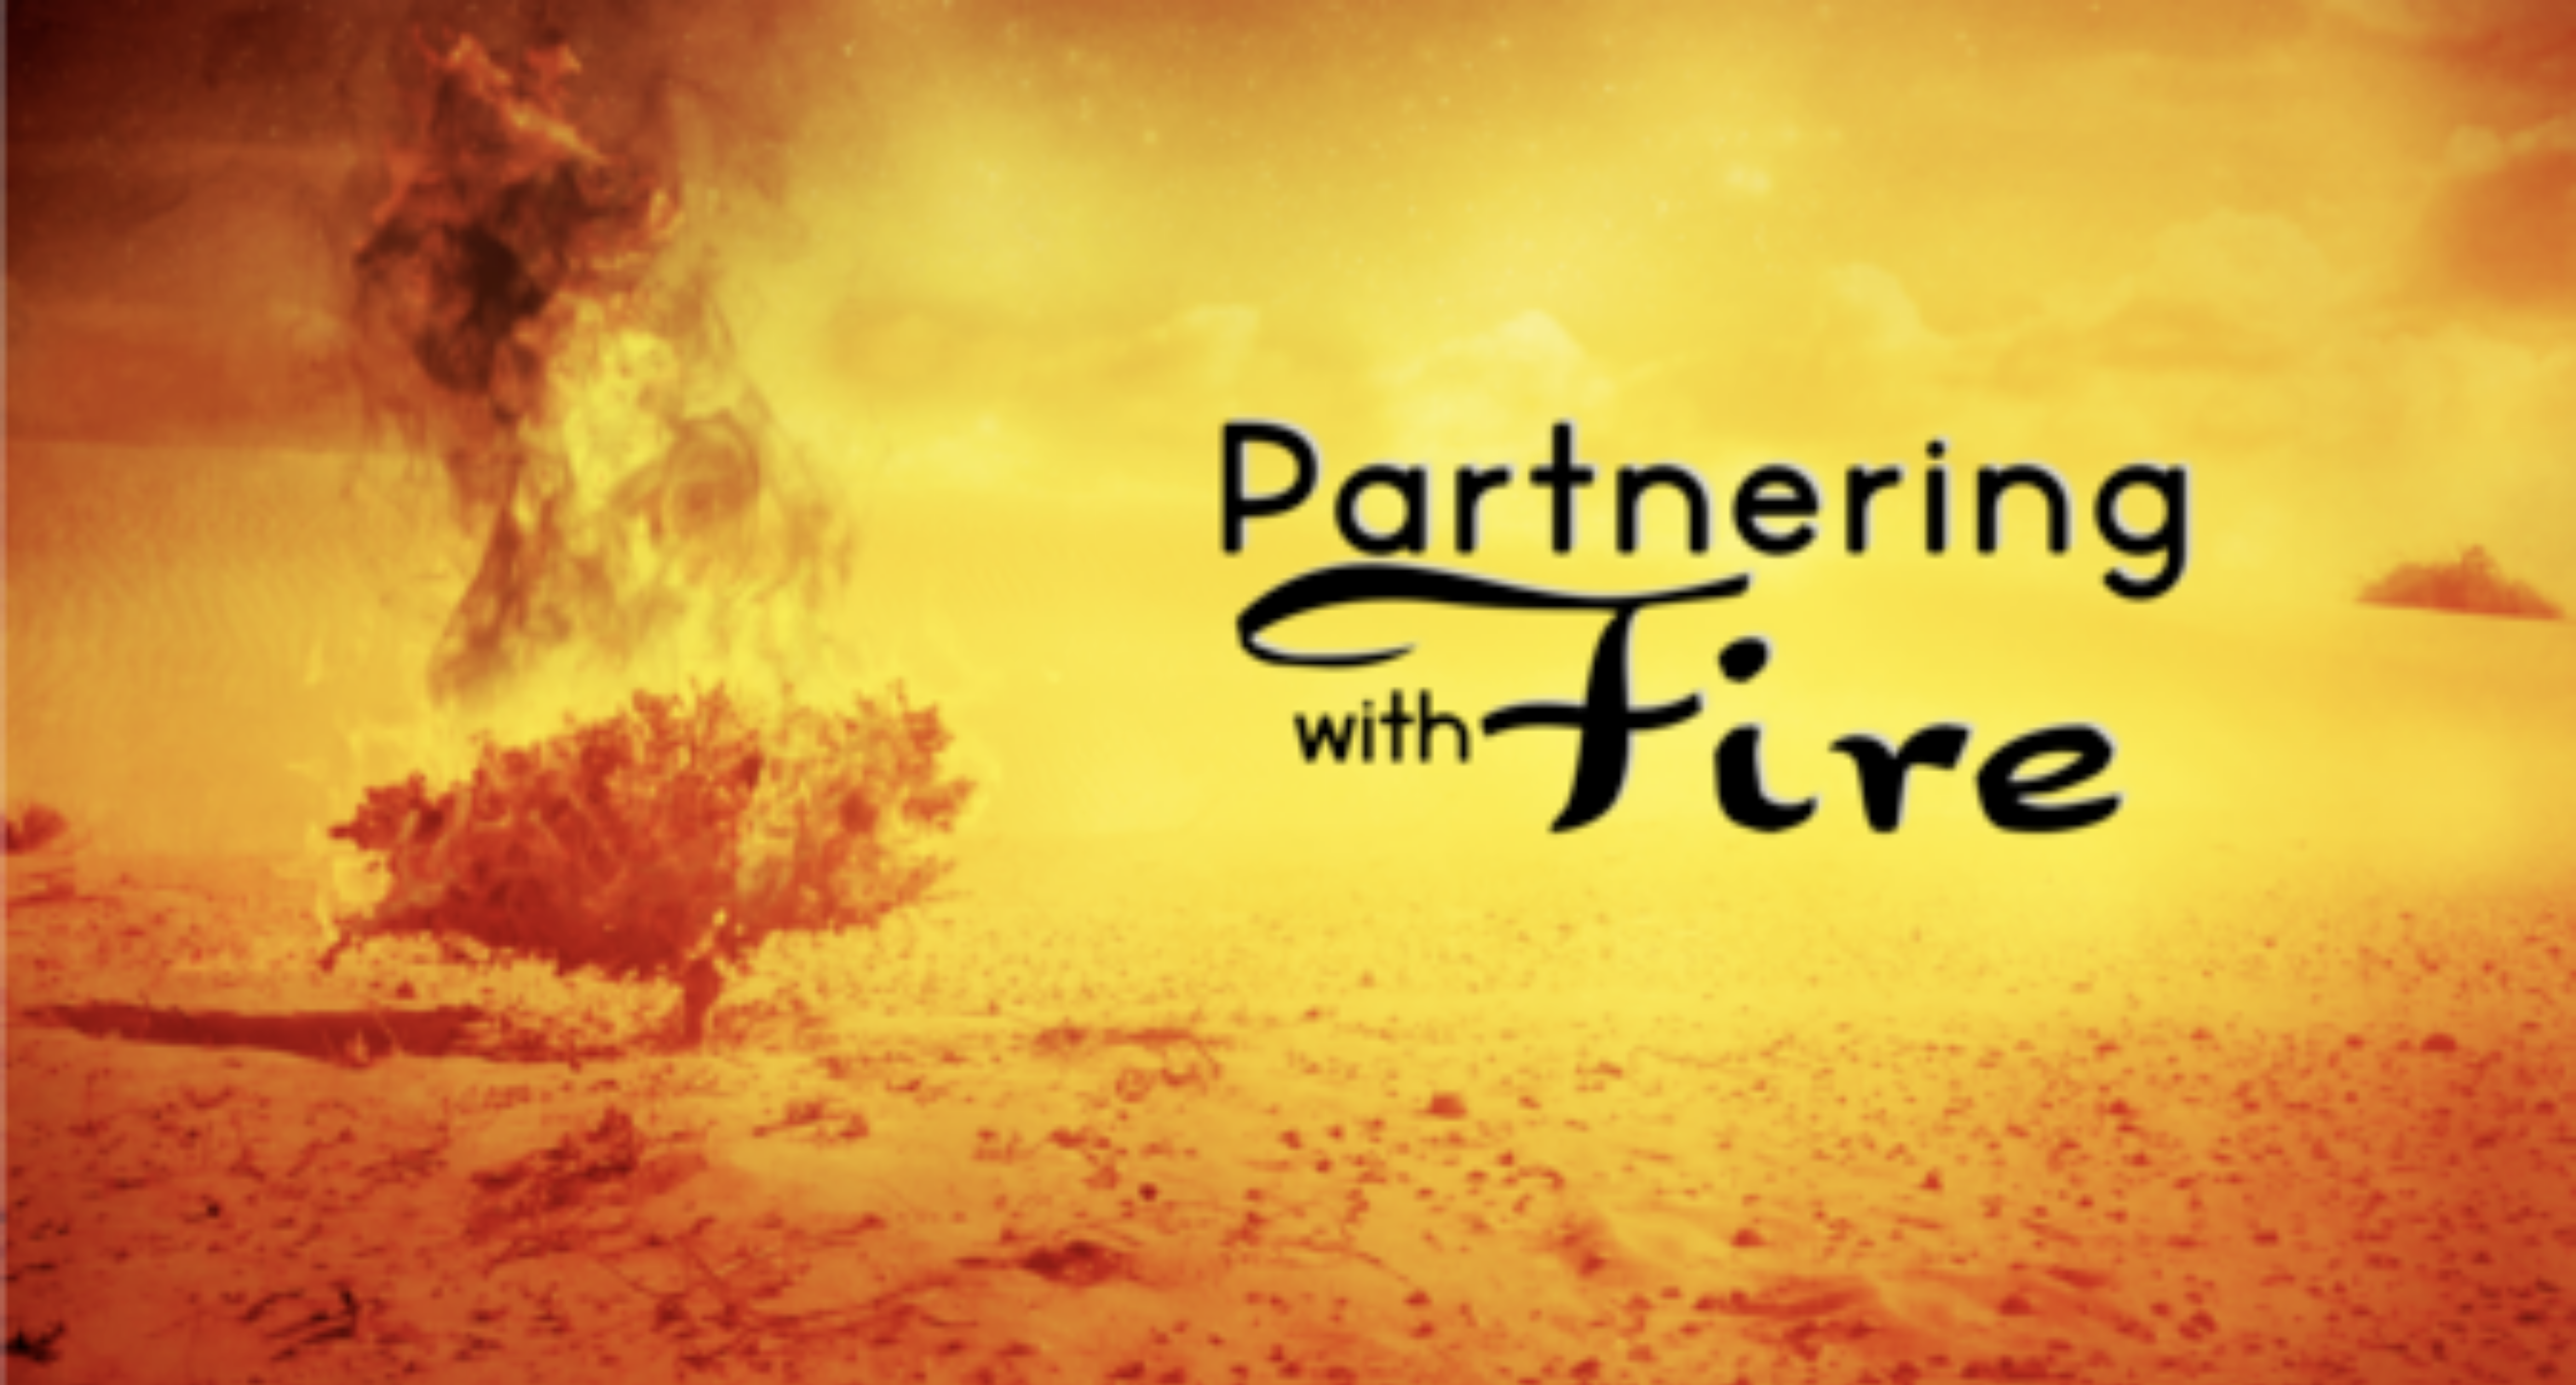 Partnering with Fire